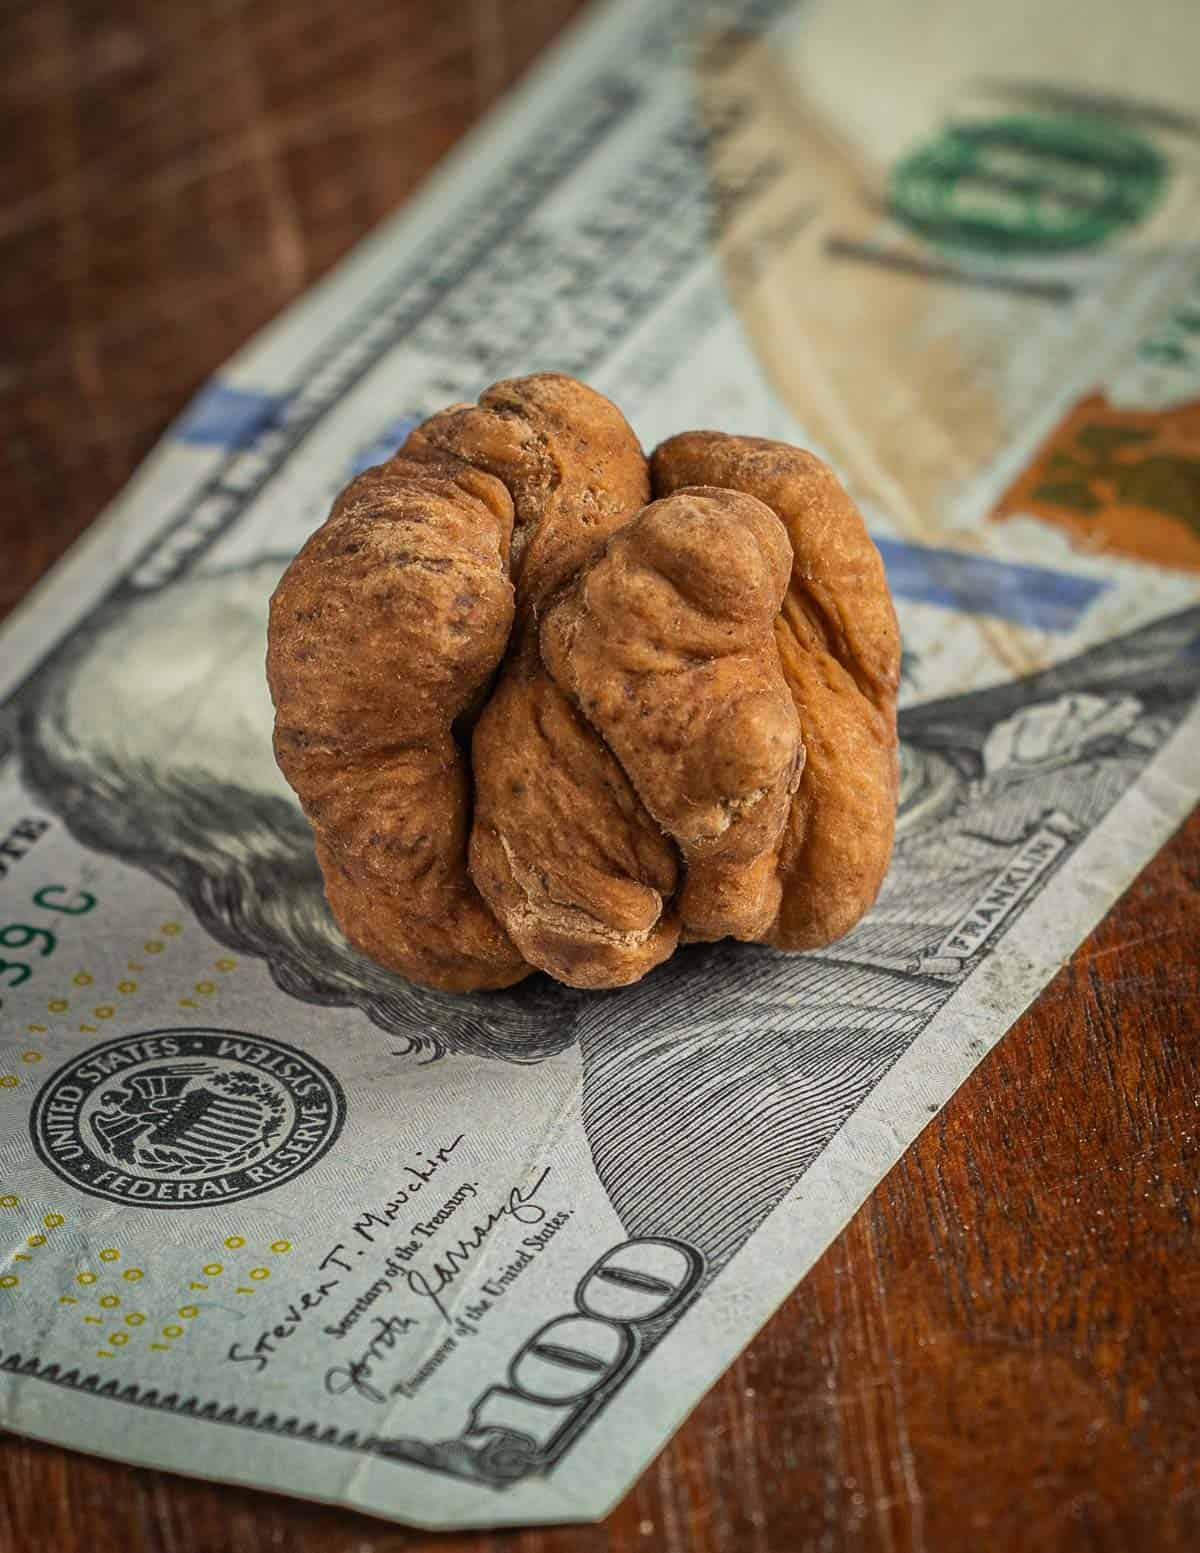 A pecan truffle mushroom placed on a hundred dollar bill to show its value. 